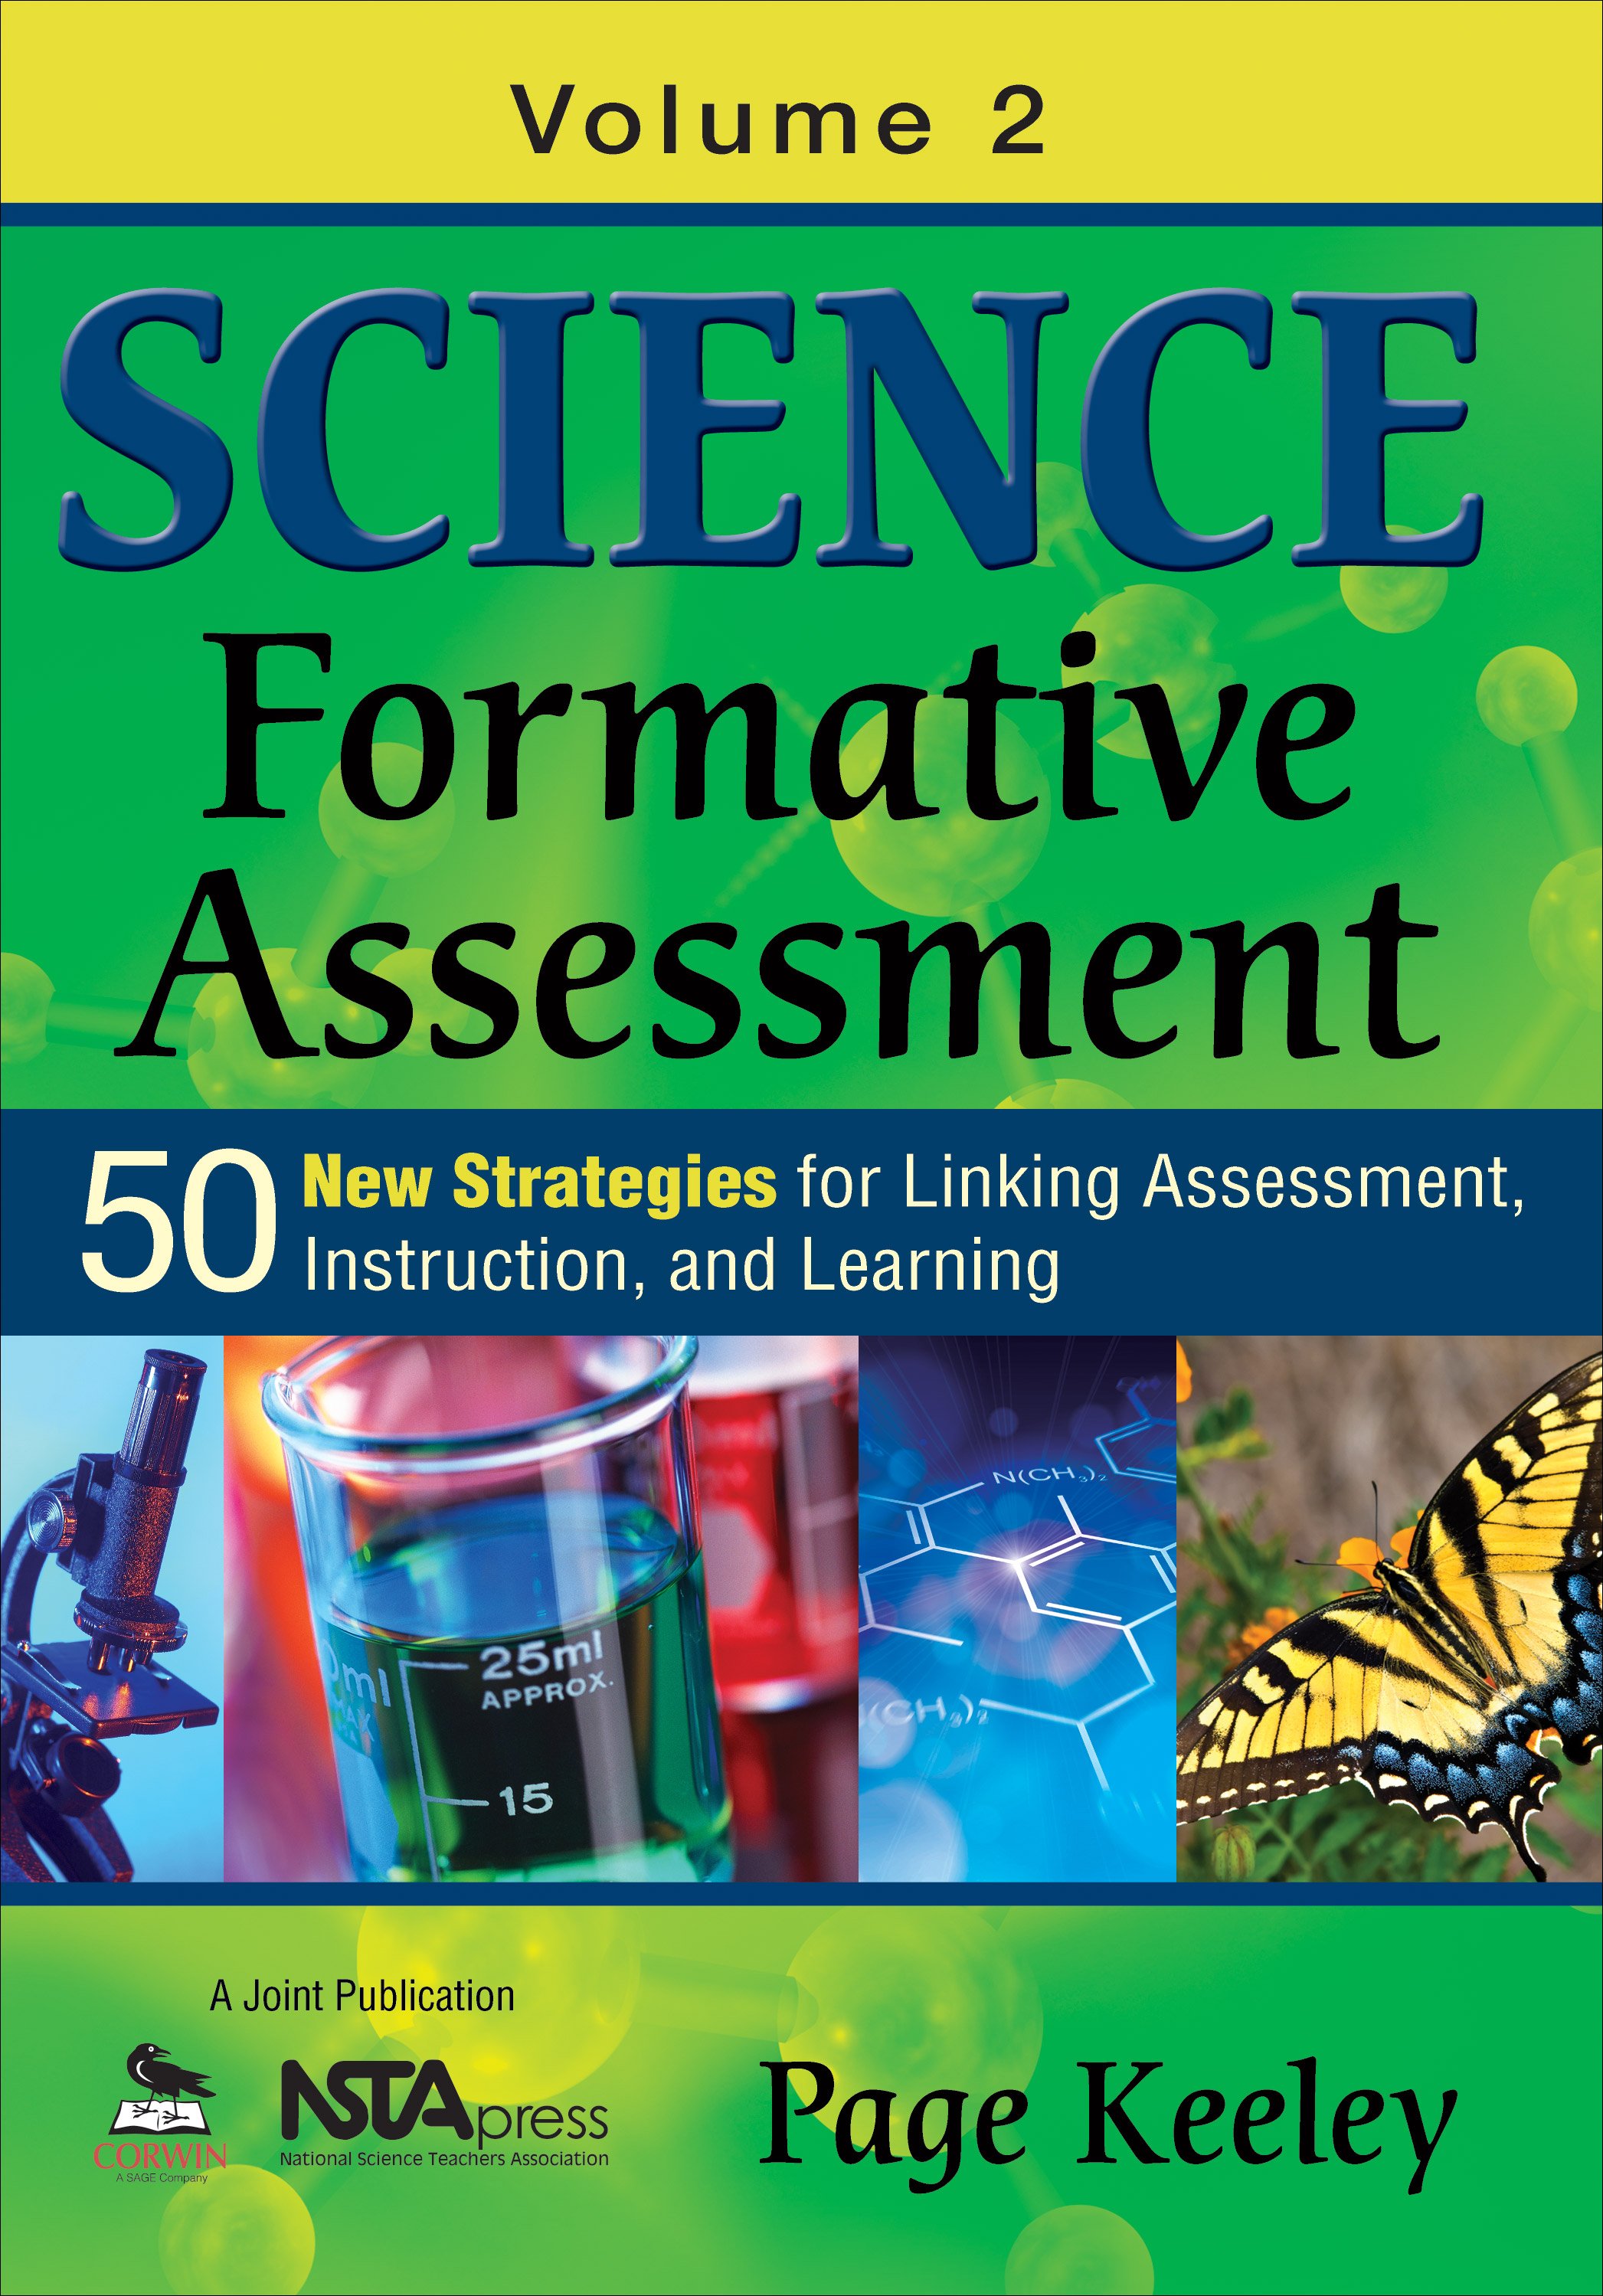 formative assessment and science education